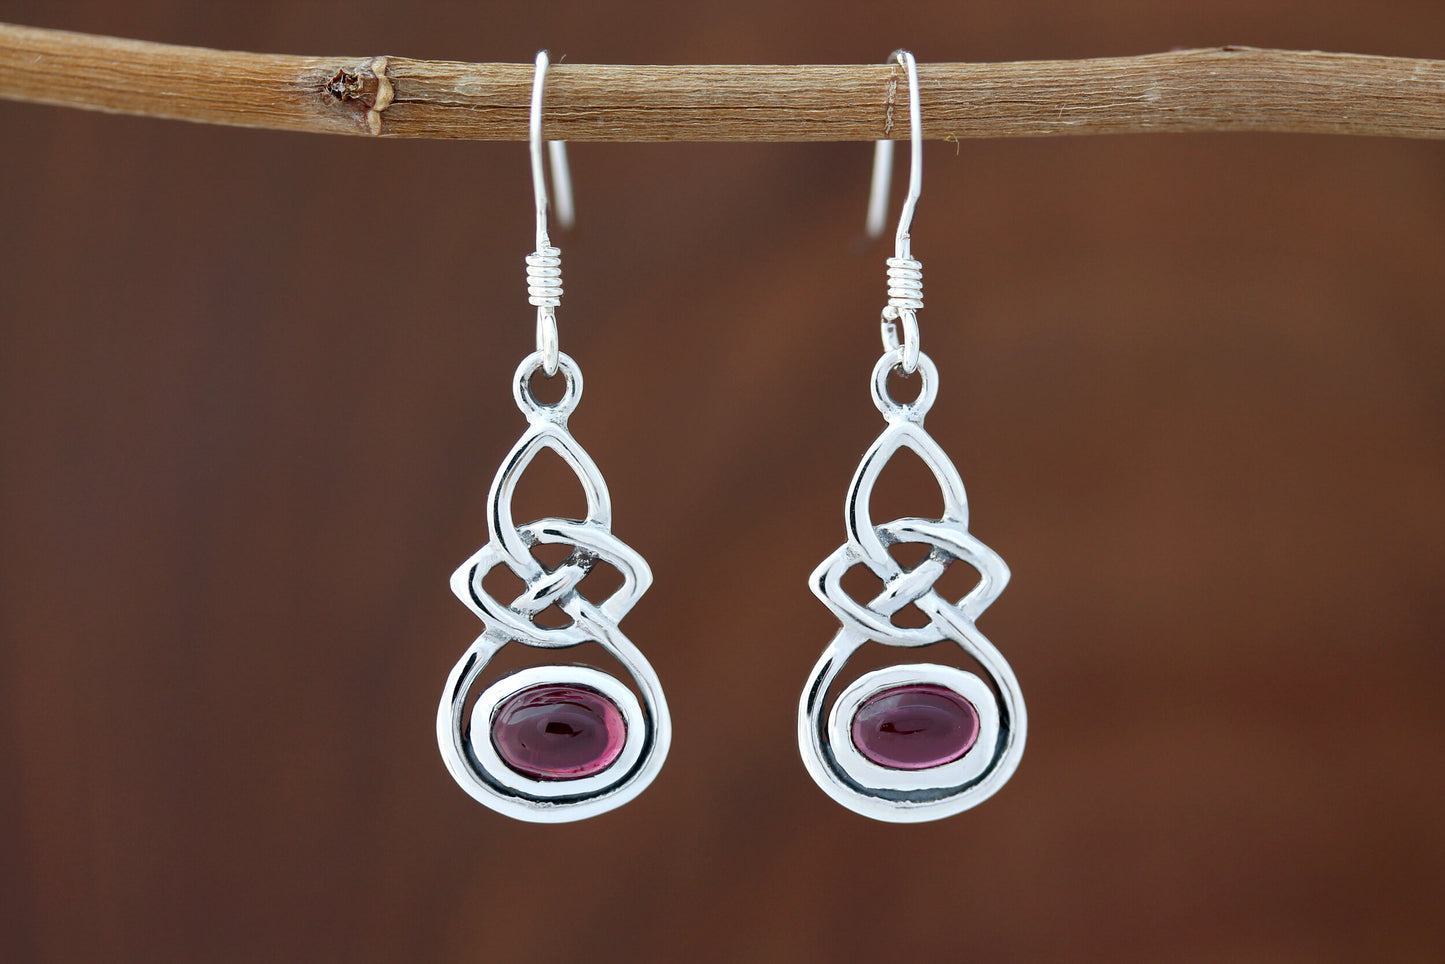 Celtic Knot Earrings - Infinity with Red Garnet Drop